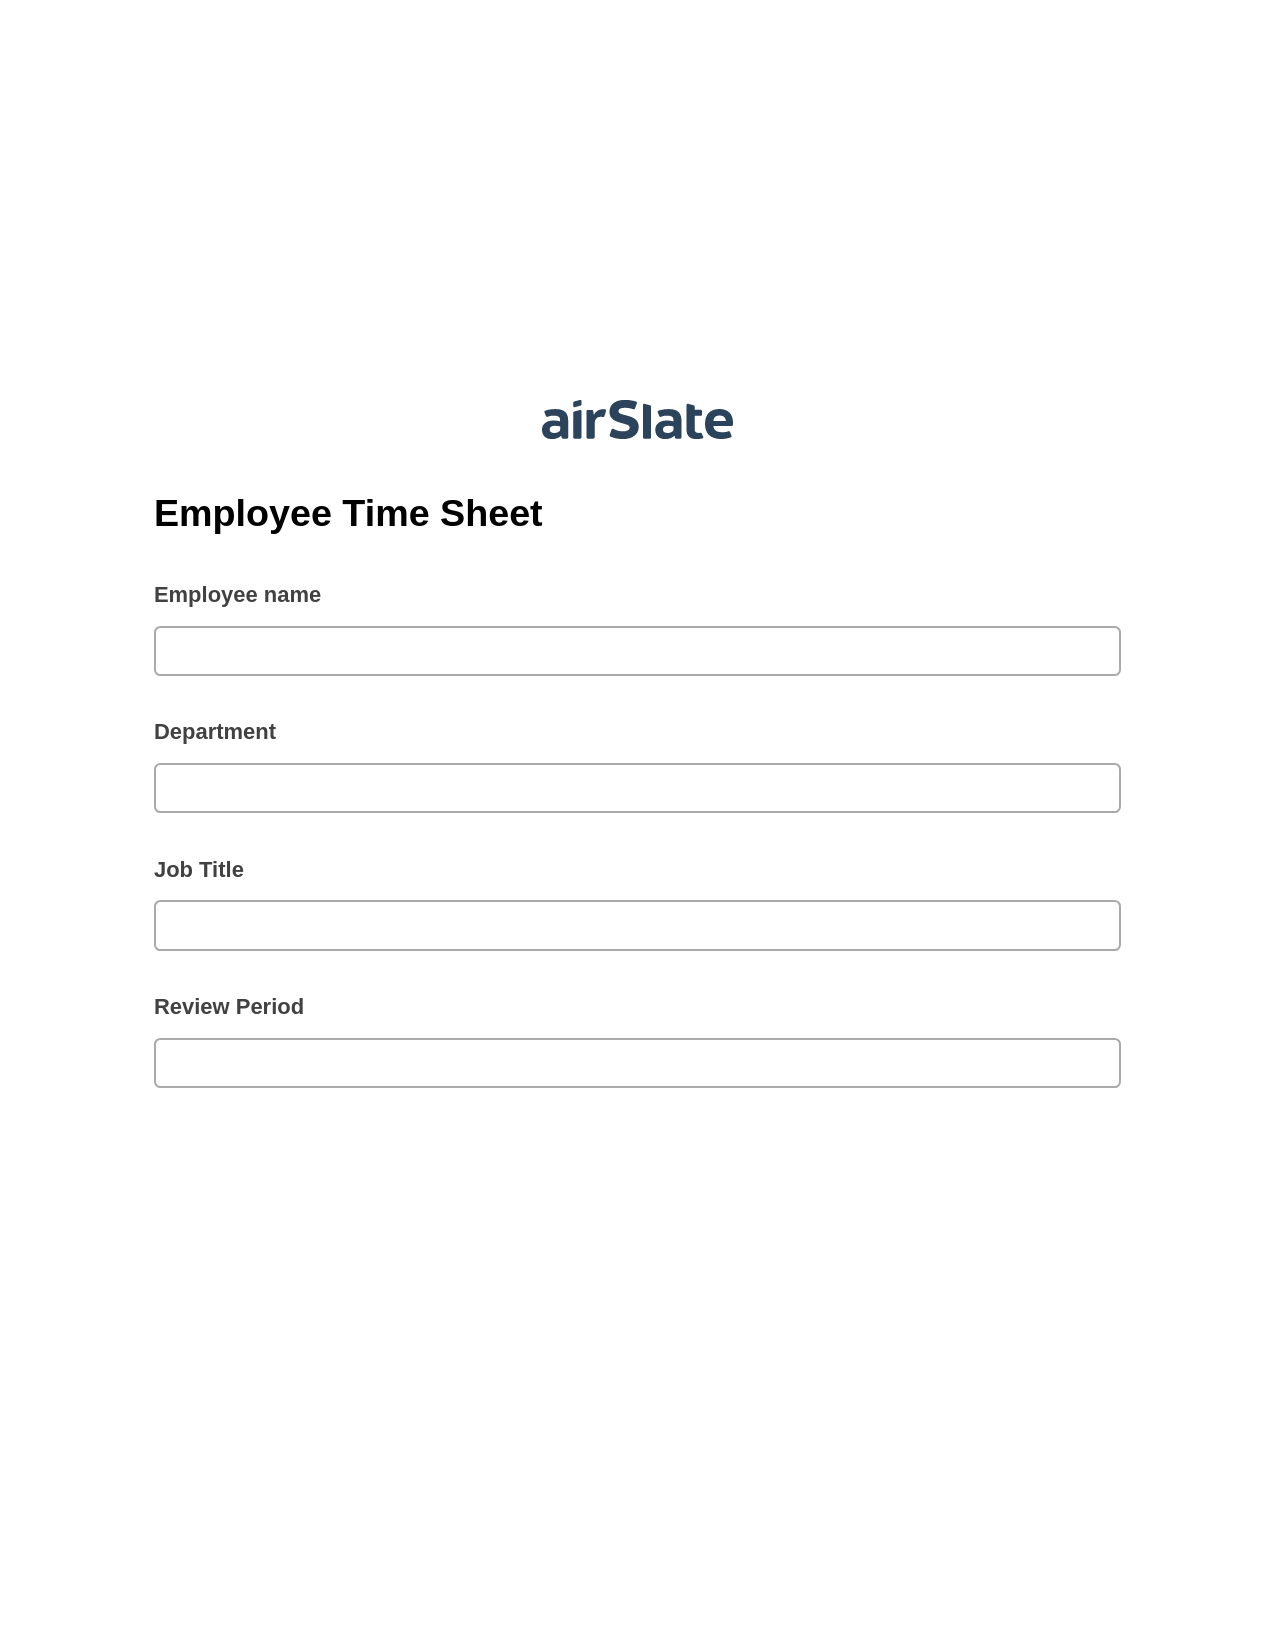 Employee Time Sheet Prefill from NetSuite records, Update Audit Trail Bot, Export to Smartsheet